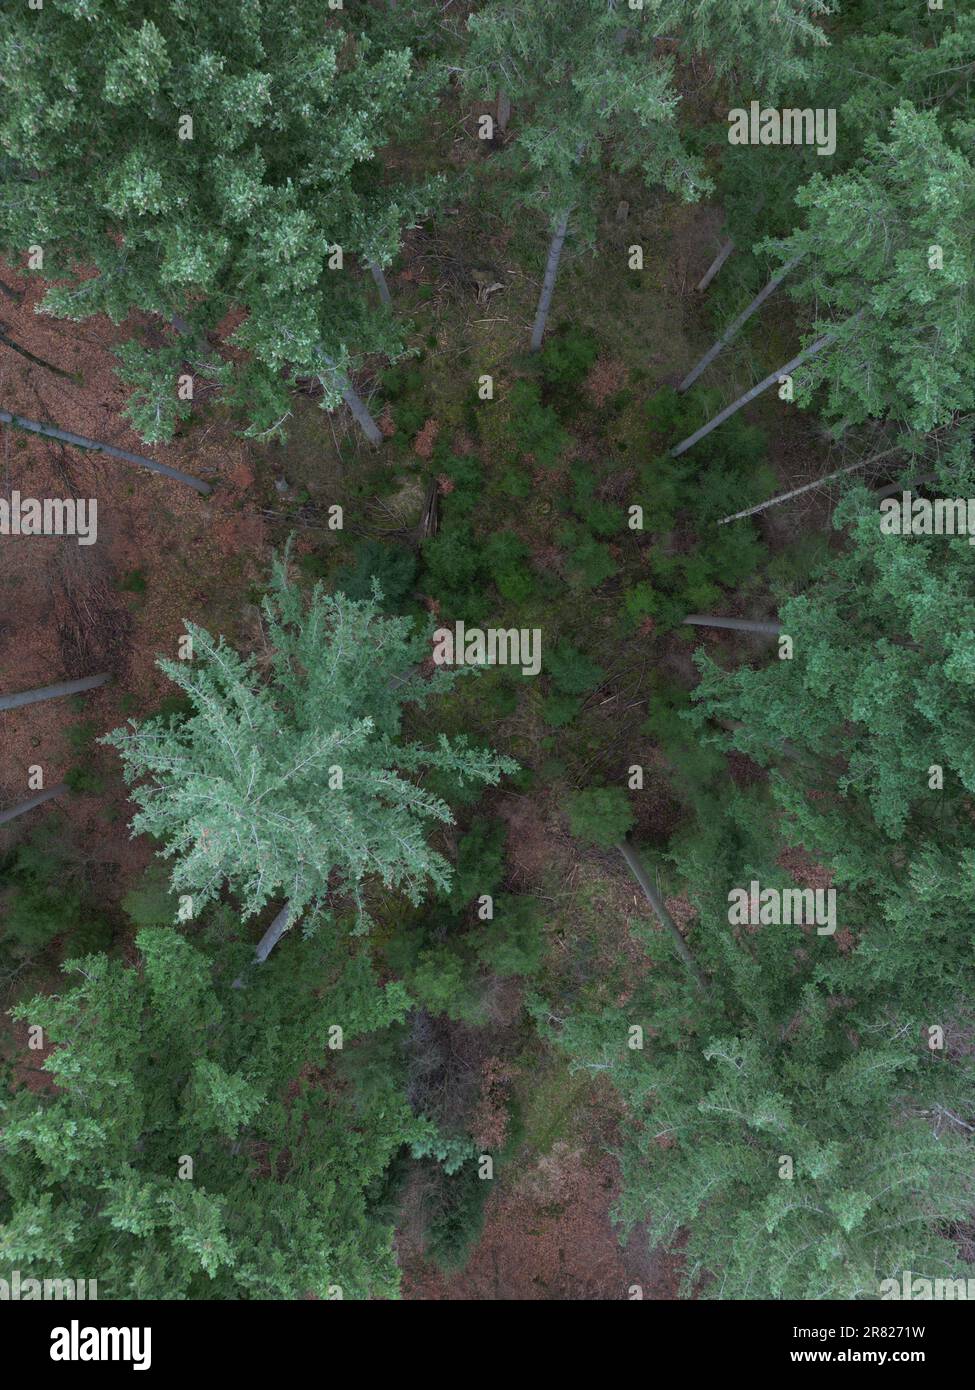 An aerial view of a lush forest with an array of trees and large rocks scattered throughout Stock Photo